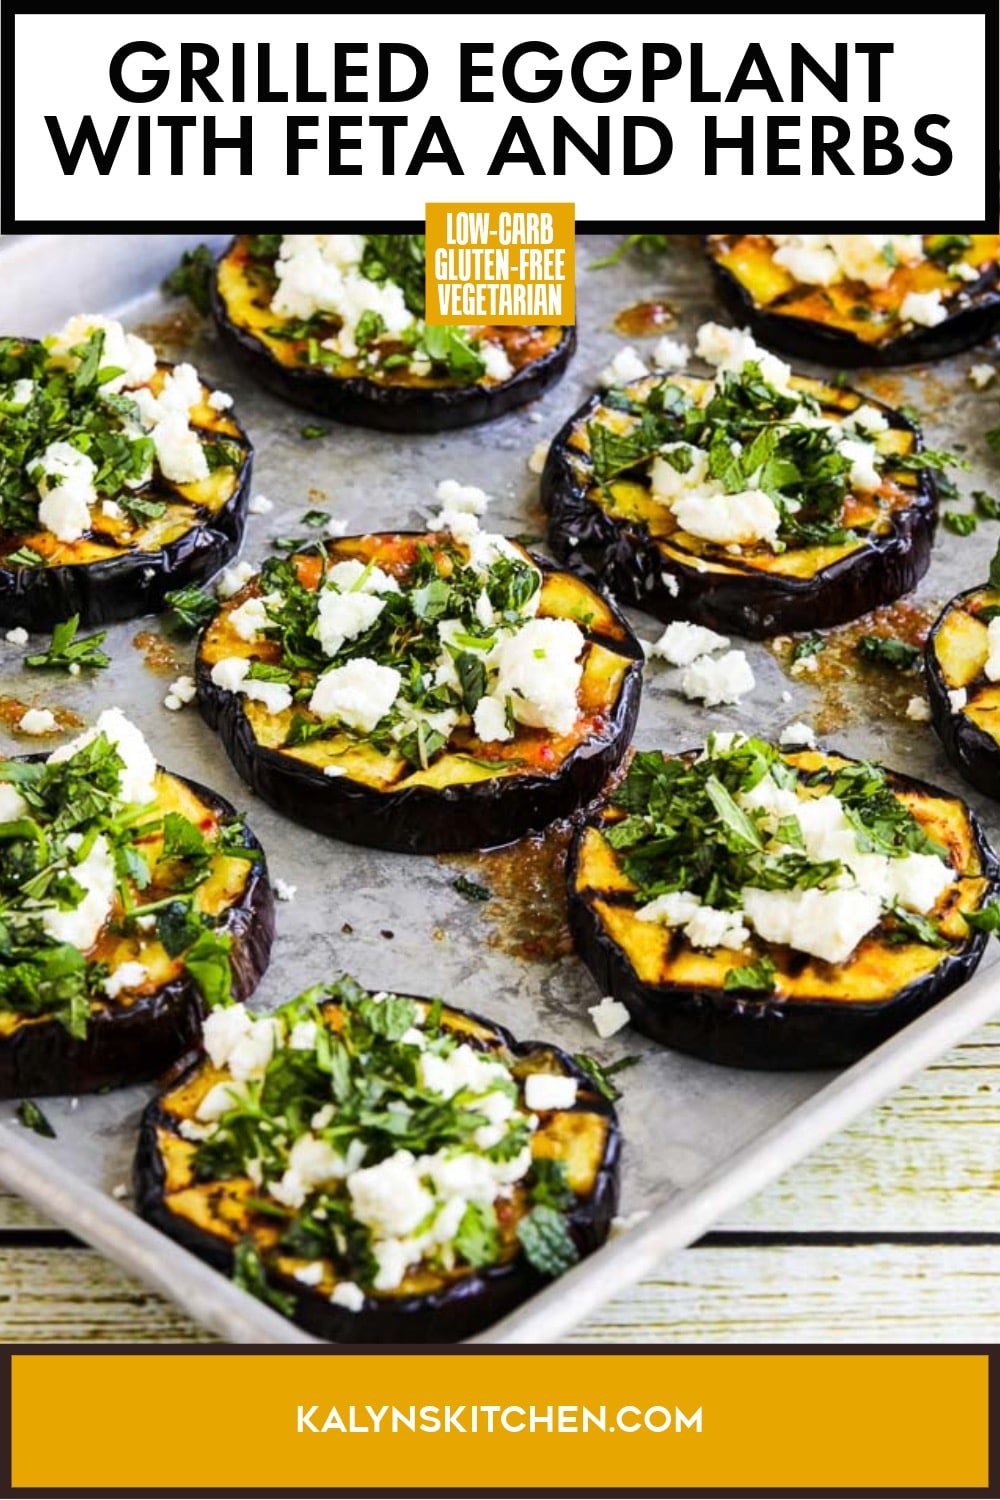 Pinterest image of Grilled Eggplant with Feta and Herbs